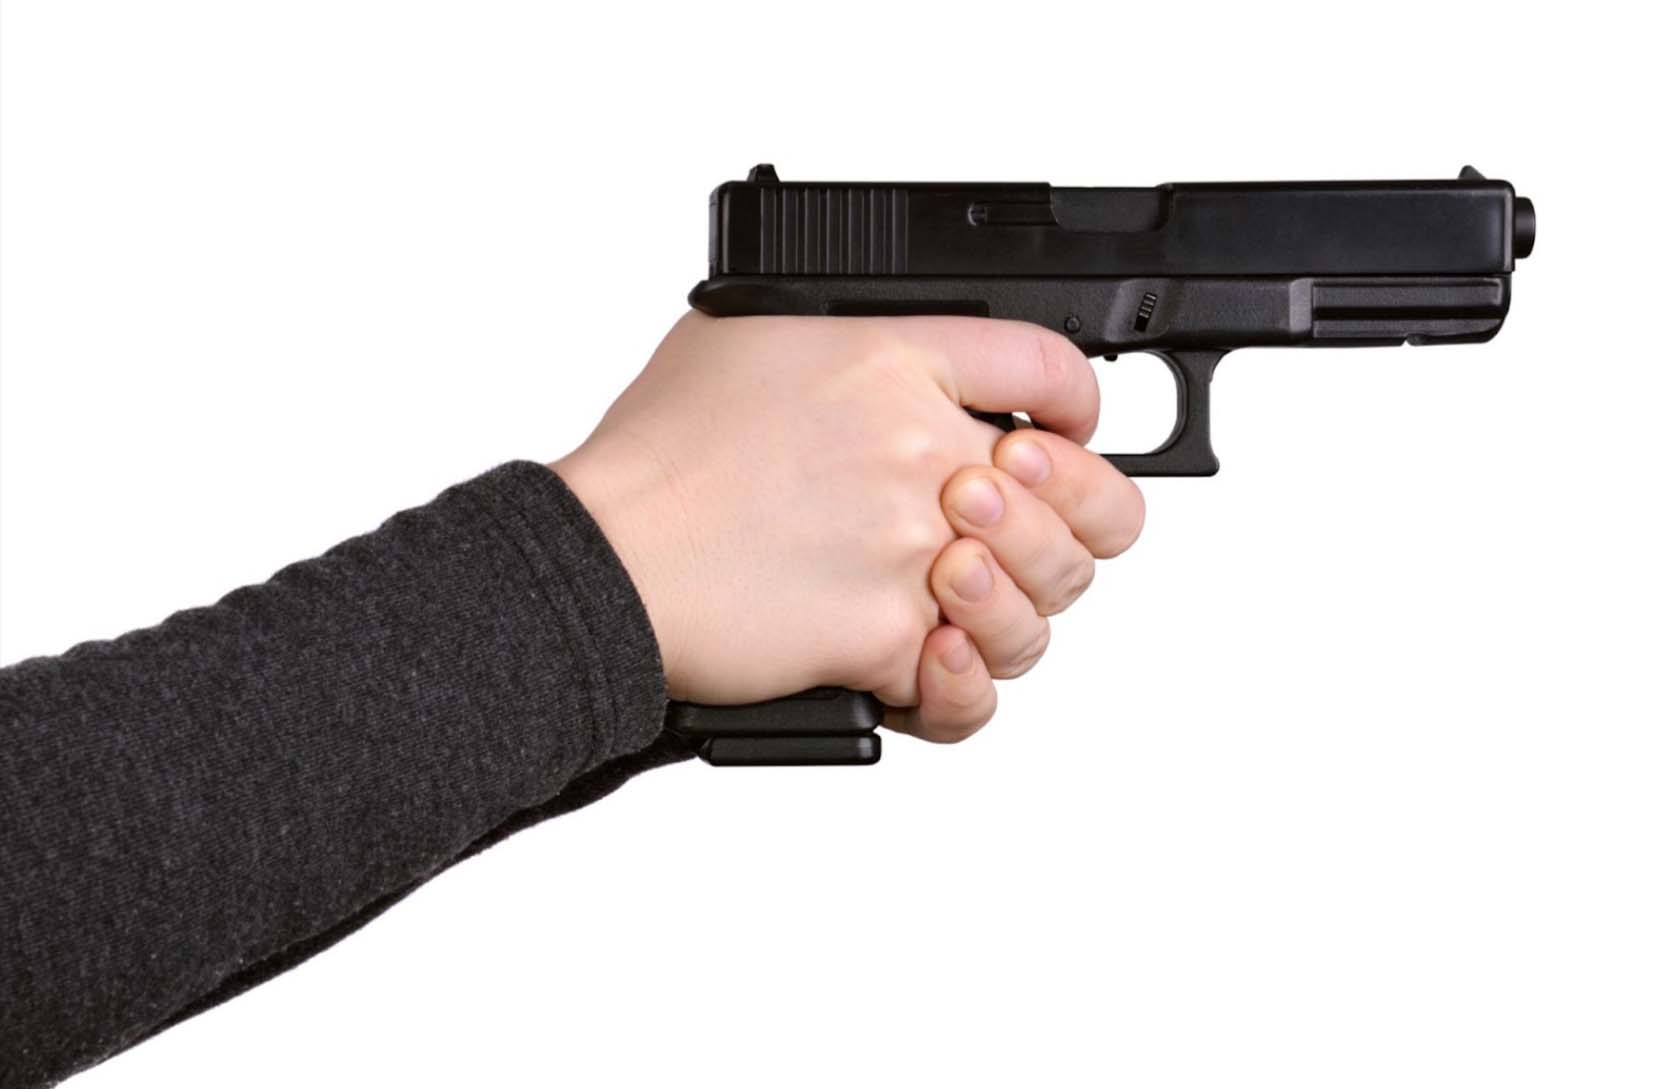 Detailed close-up of a hand gripping a pistol, showcasing the firearm's design and the proper holding technique.